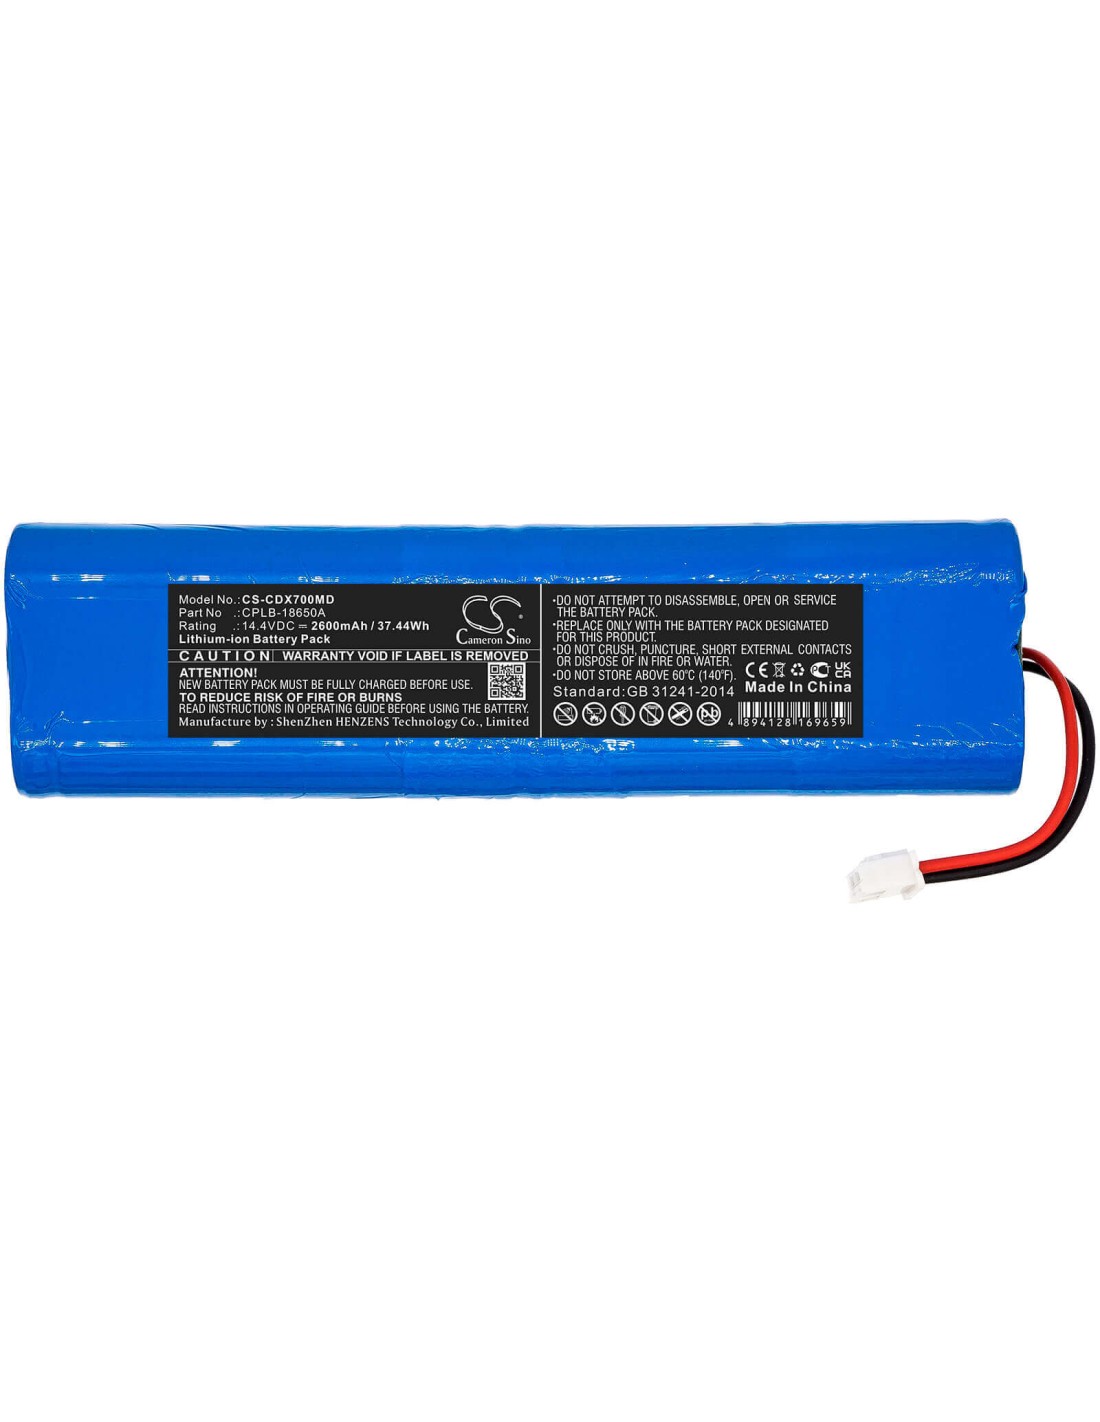 Battery for Creative, Deluxe-70 14.4V, 2600mAh - 37.44Wh